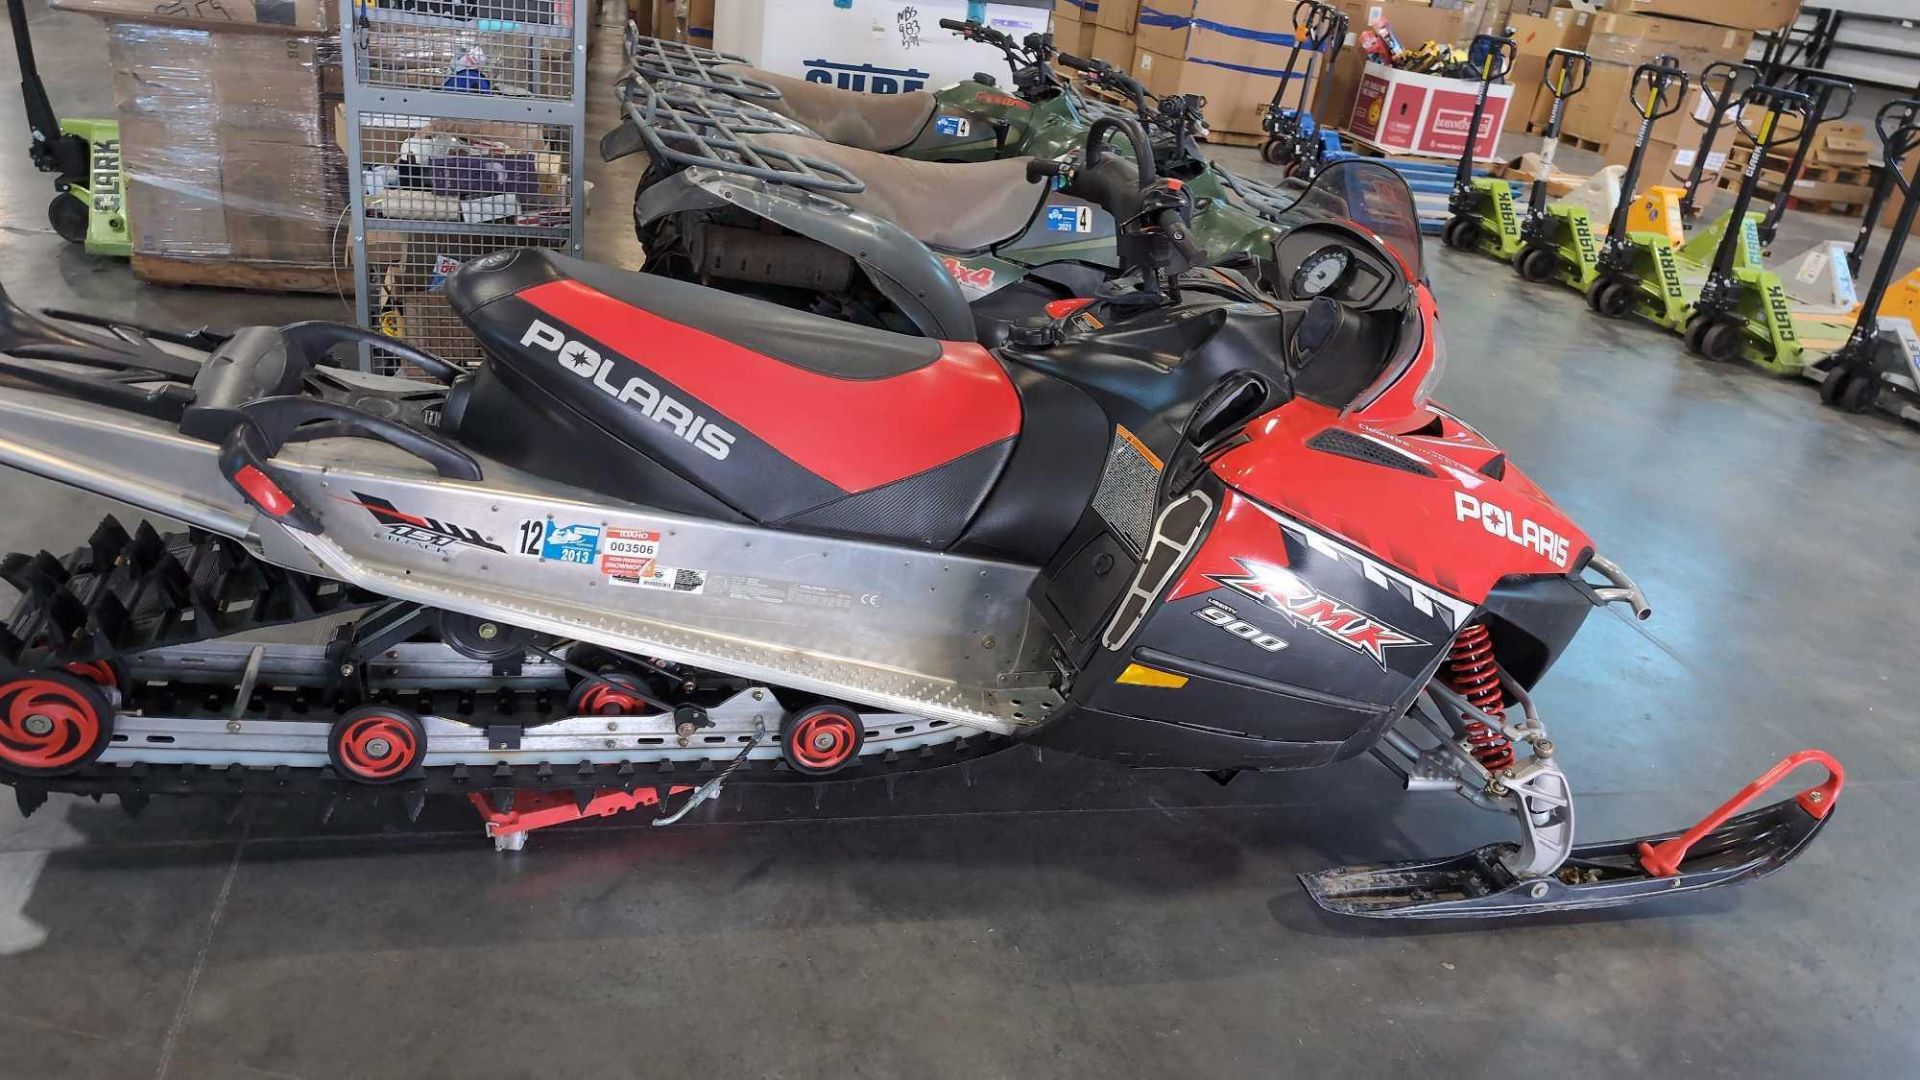 2006 Polaris 900 RMK Snowmobile, w/ 4,119 Miles runs and drives title in hand $195 Doc Fee - Image 5 of 6